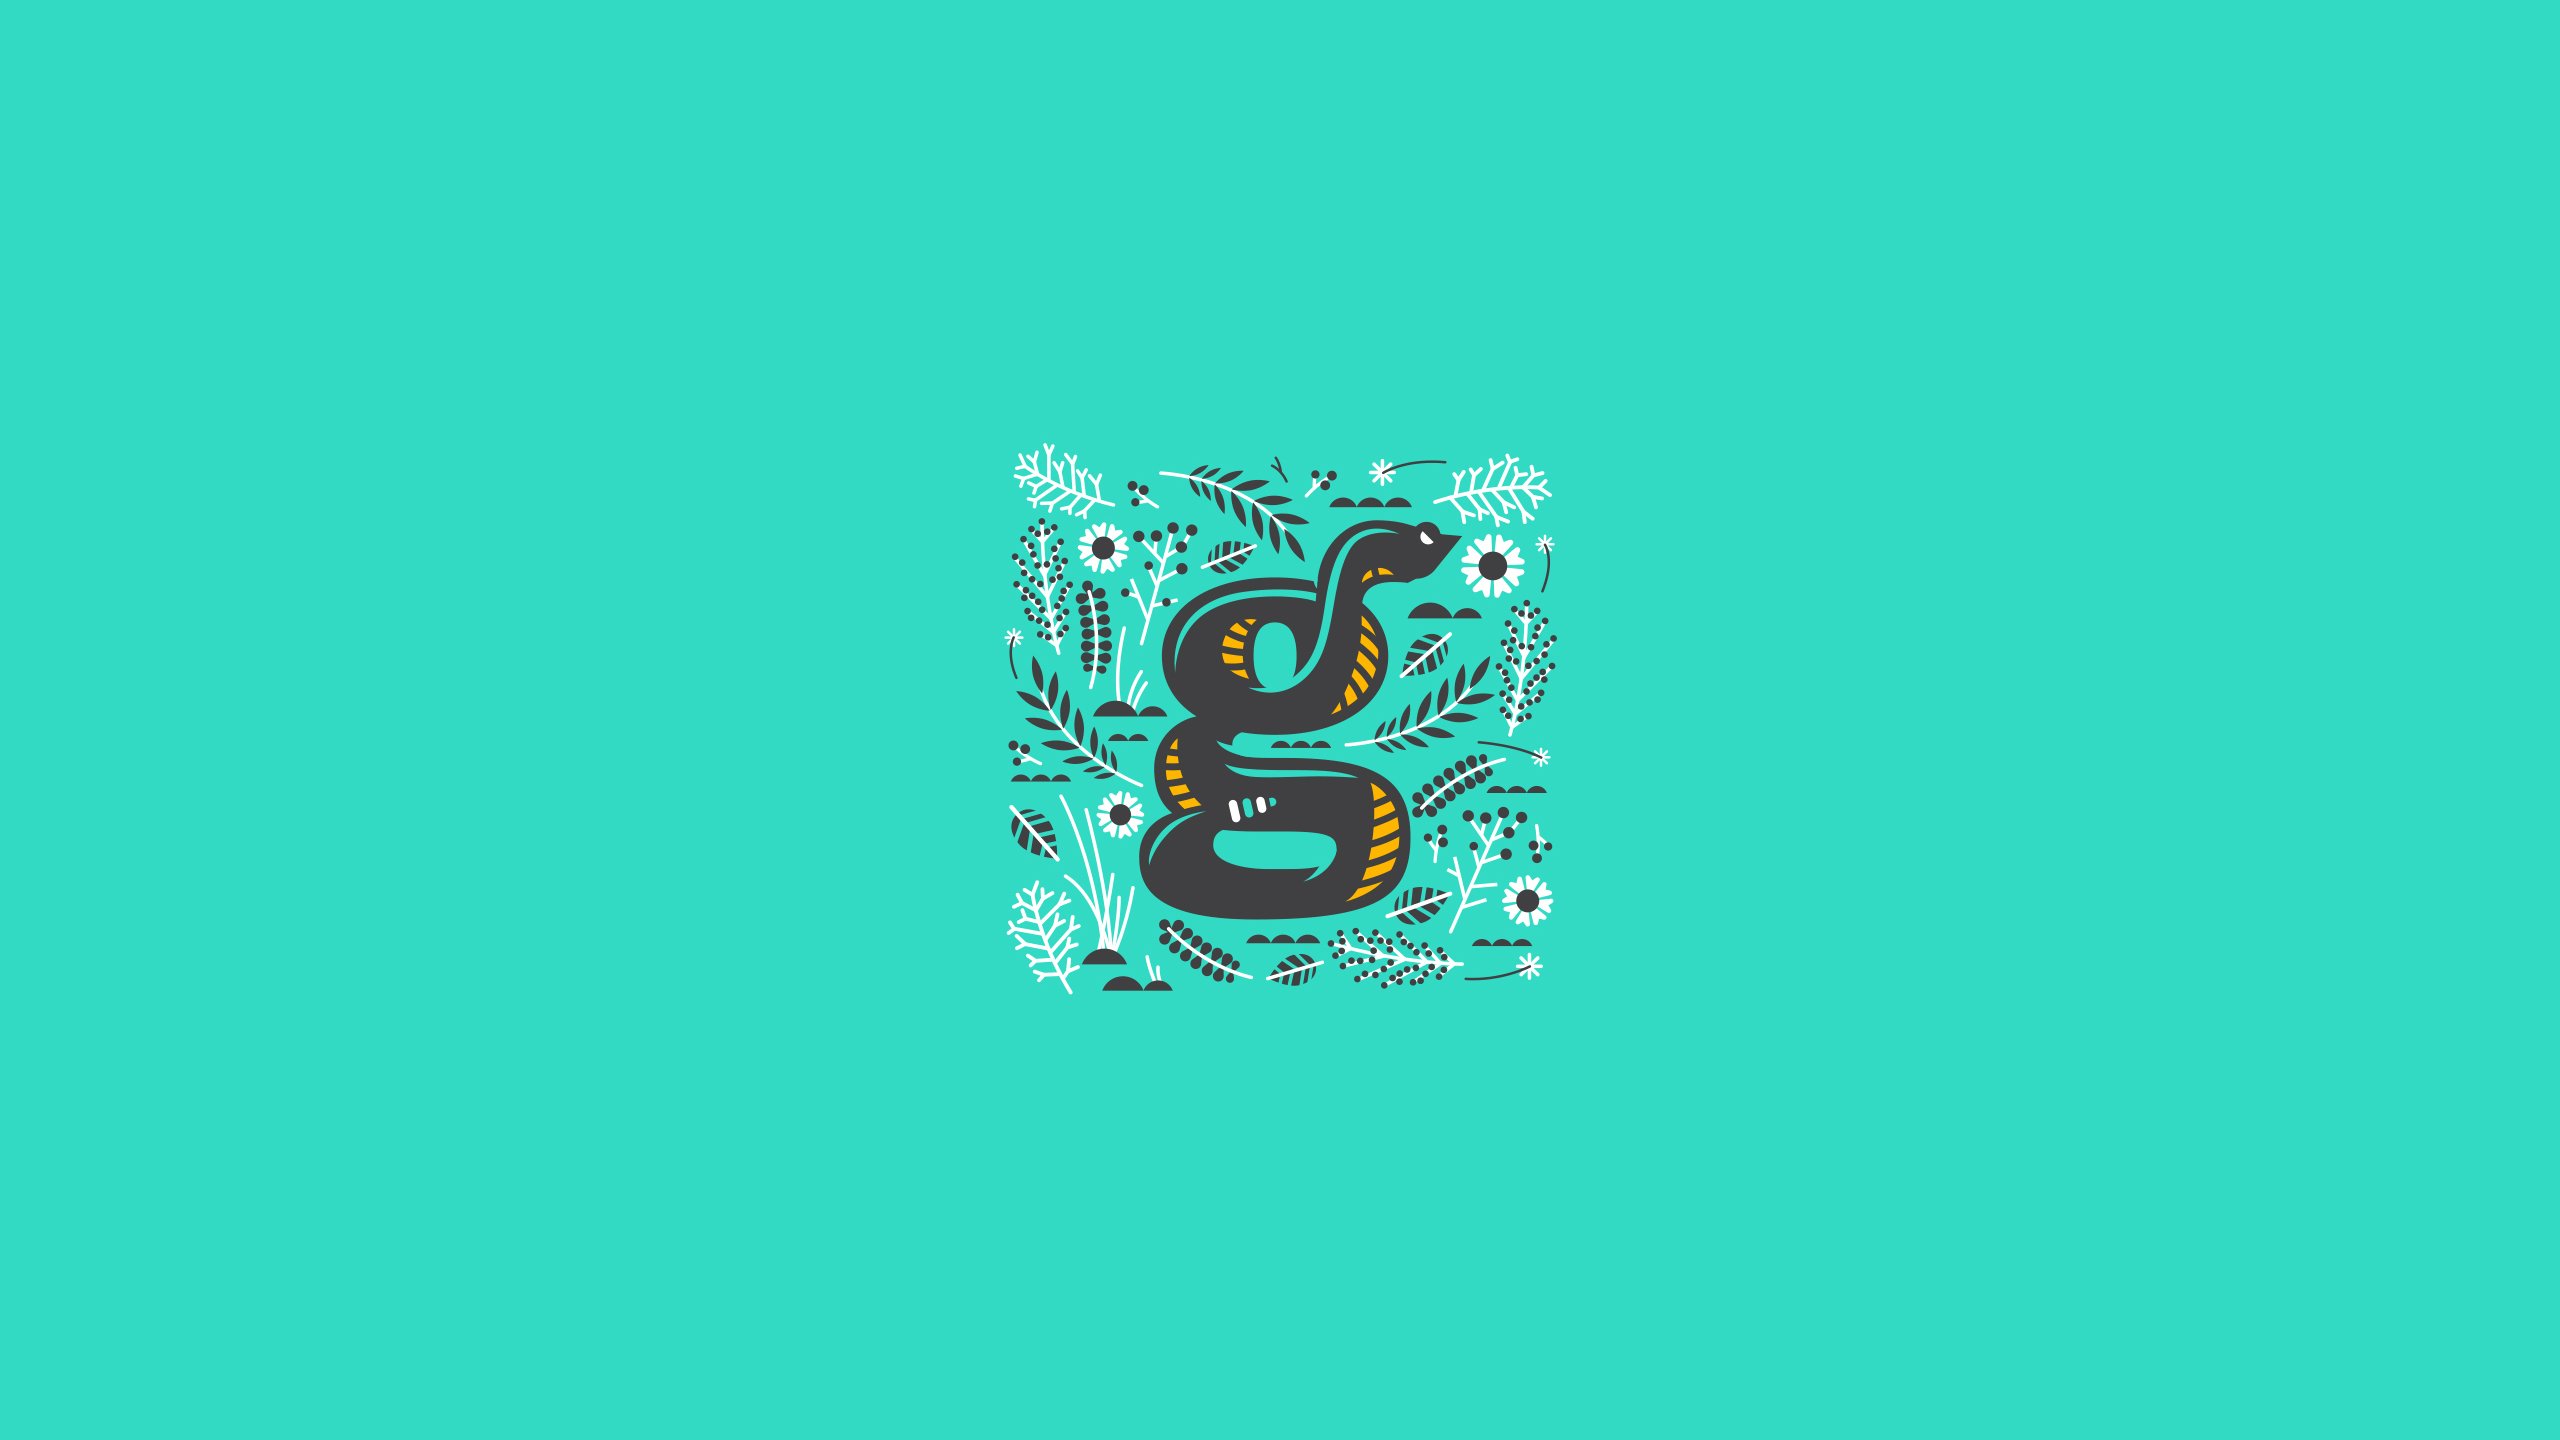 illustration, Letter, Teal, Turquoise, Snake, Typographic, Typography Wallpaper